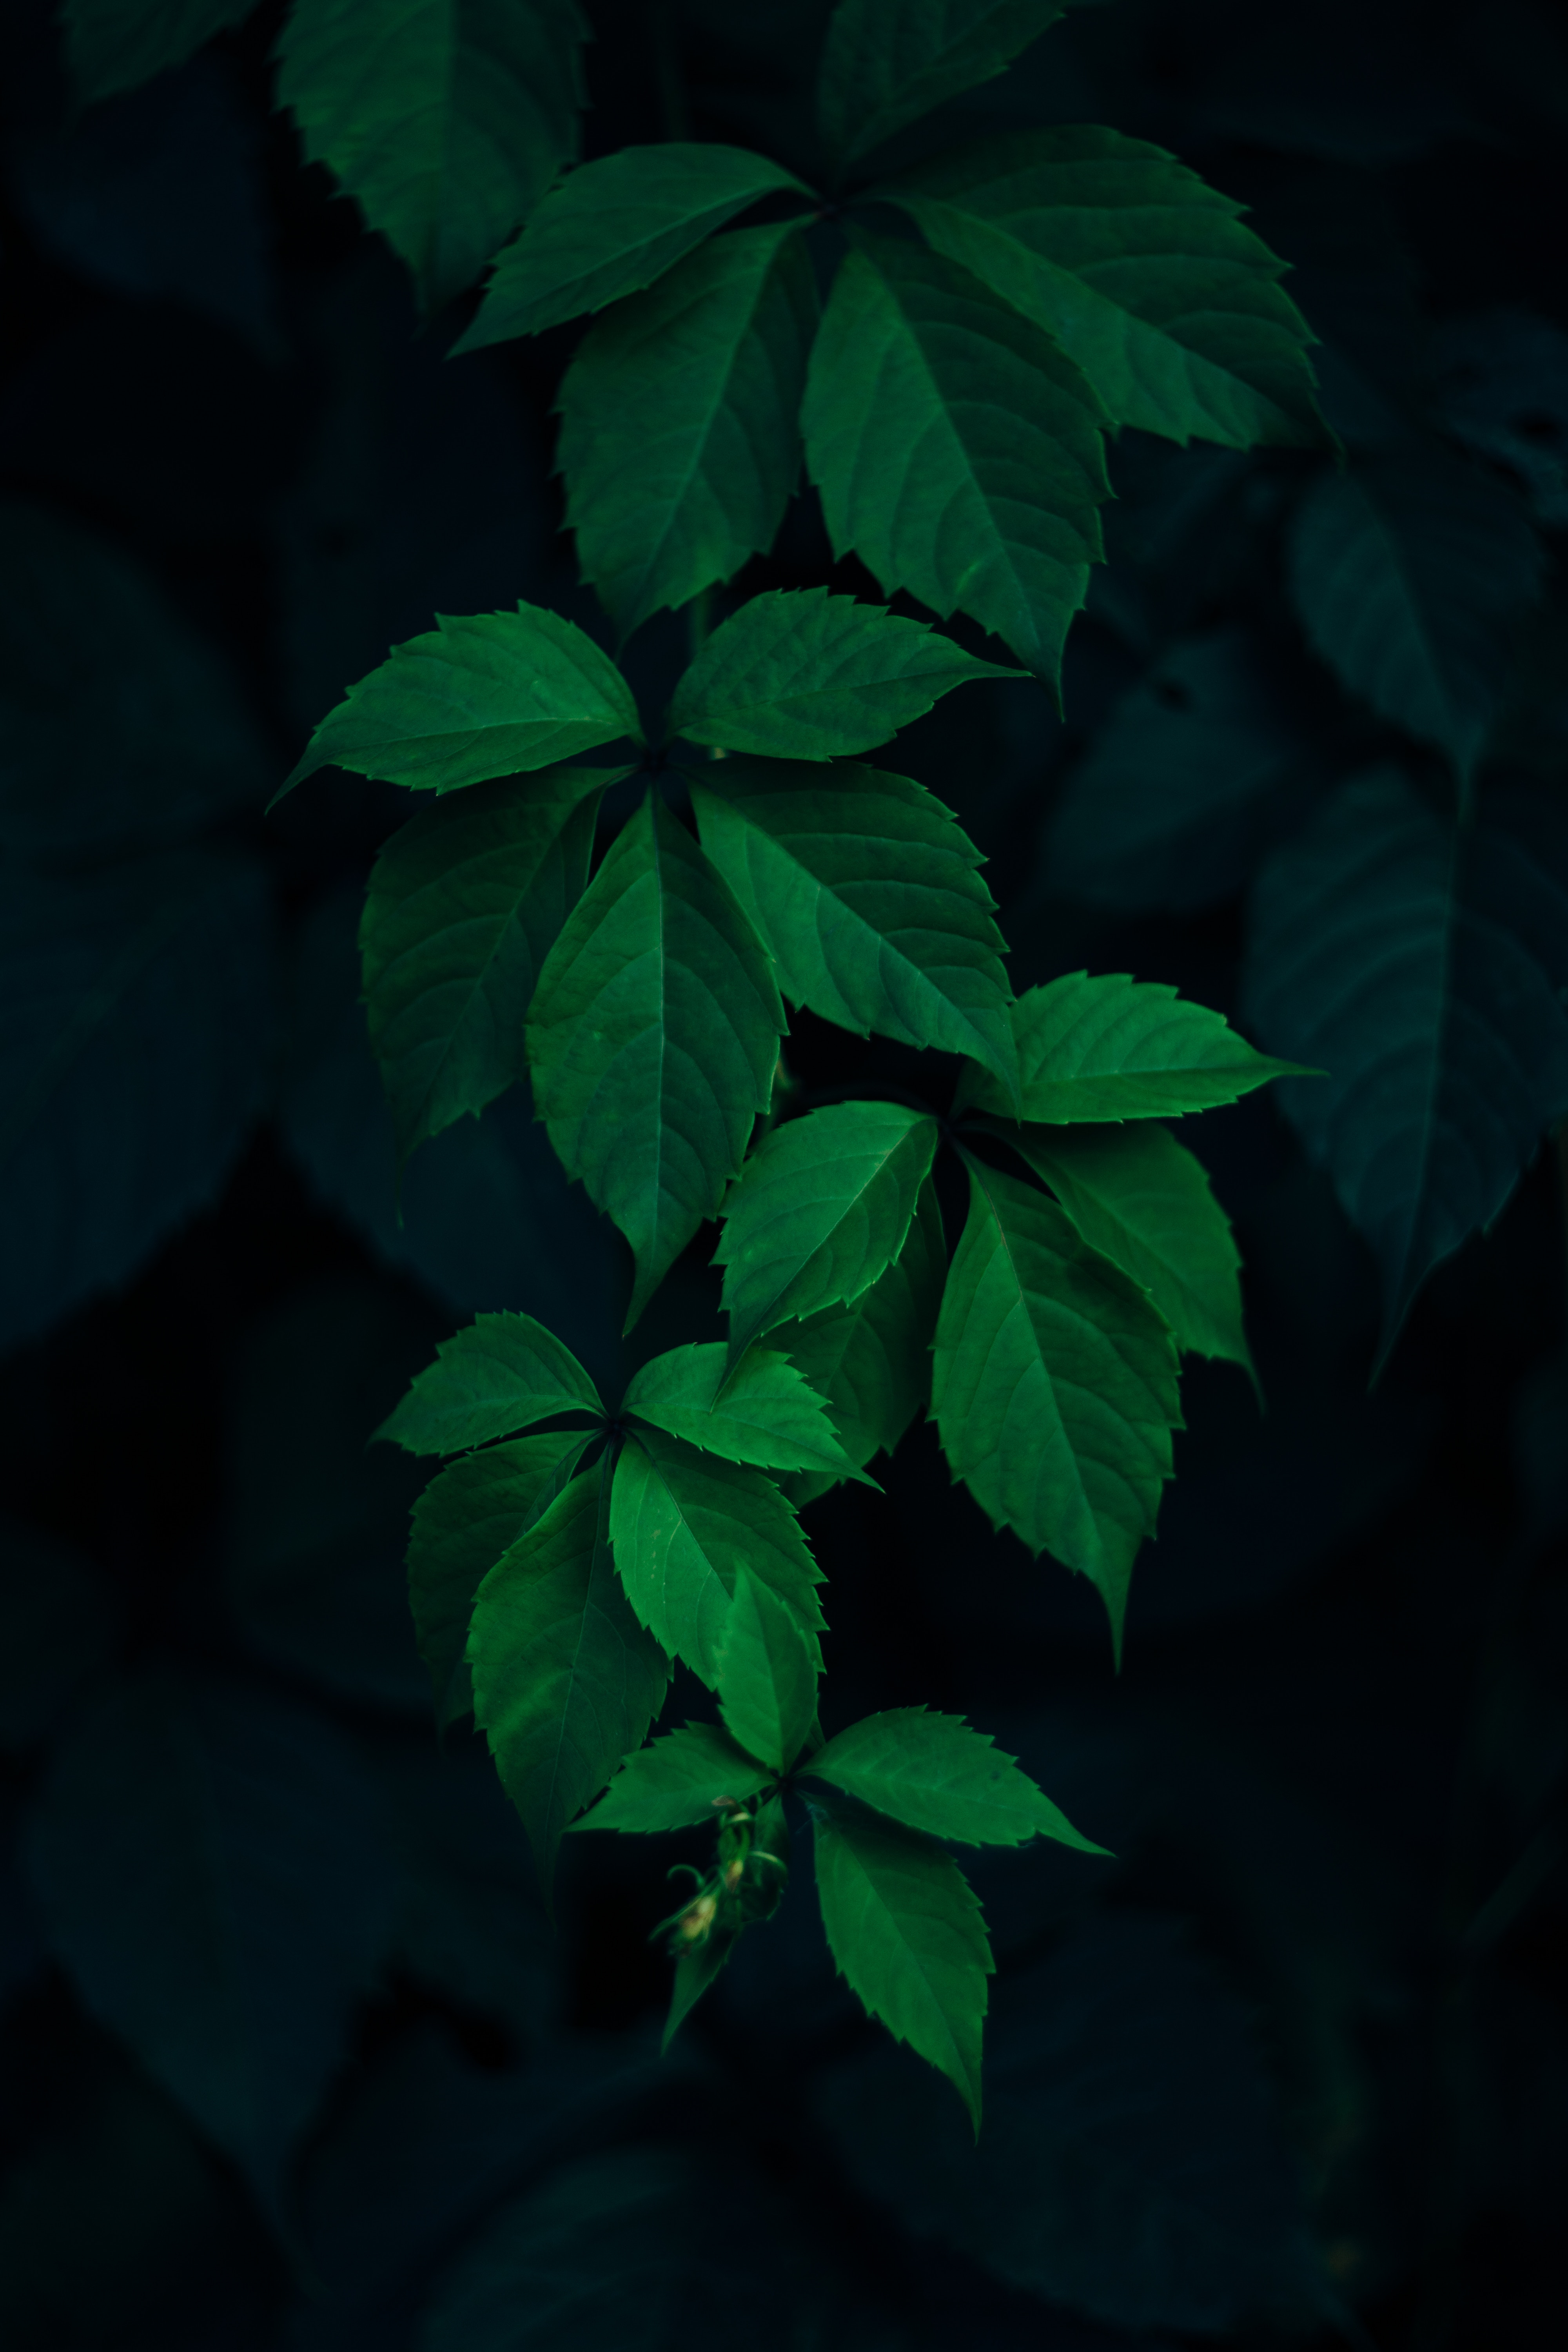 branches, leaves, nature, green, dark background